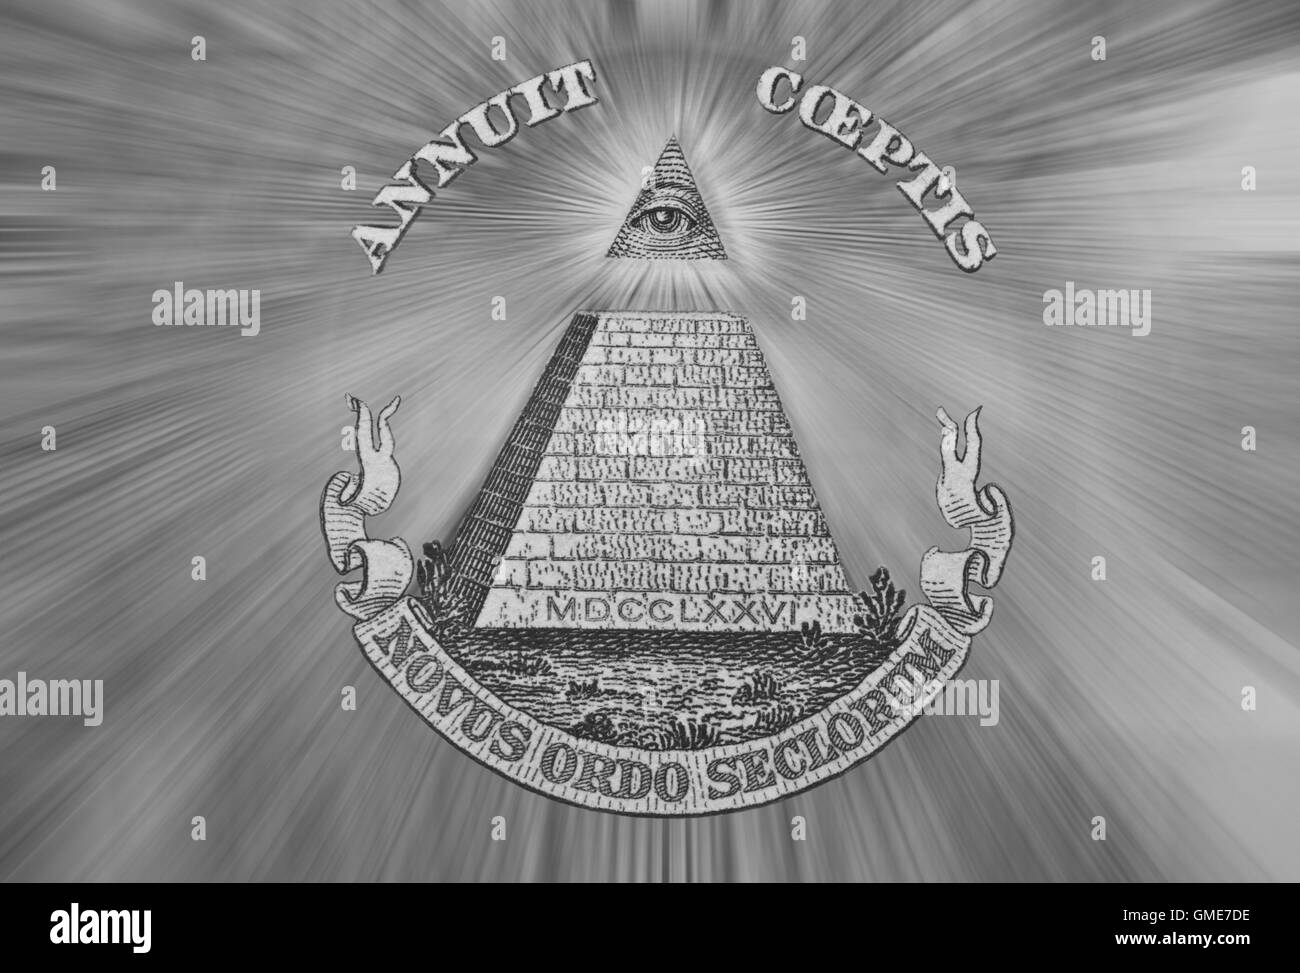 Dollar USA. Element of the image of United States one-dollar bill, pyramid, Eye of Providence, Beams from Eye every which way. Stock Photo